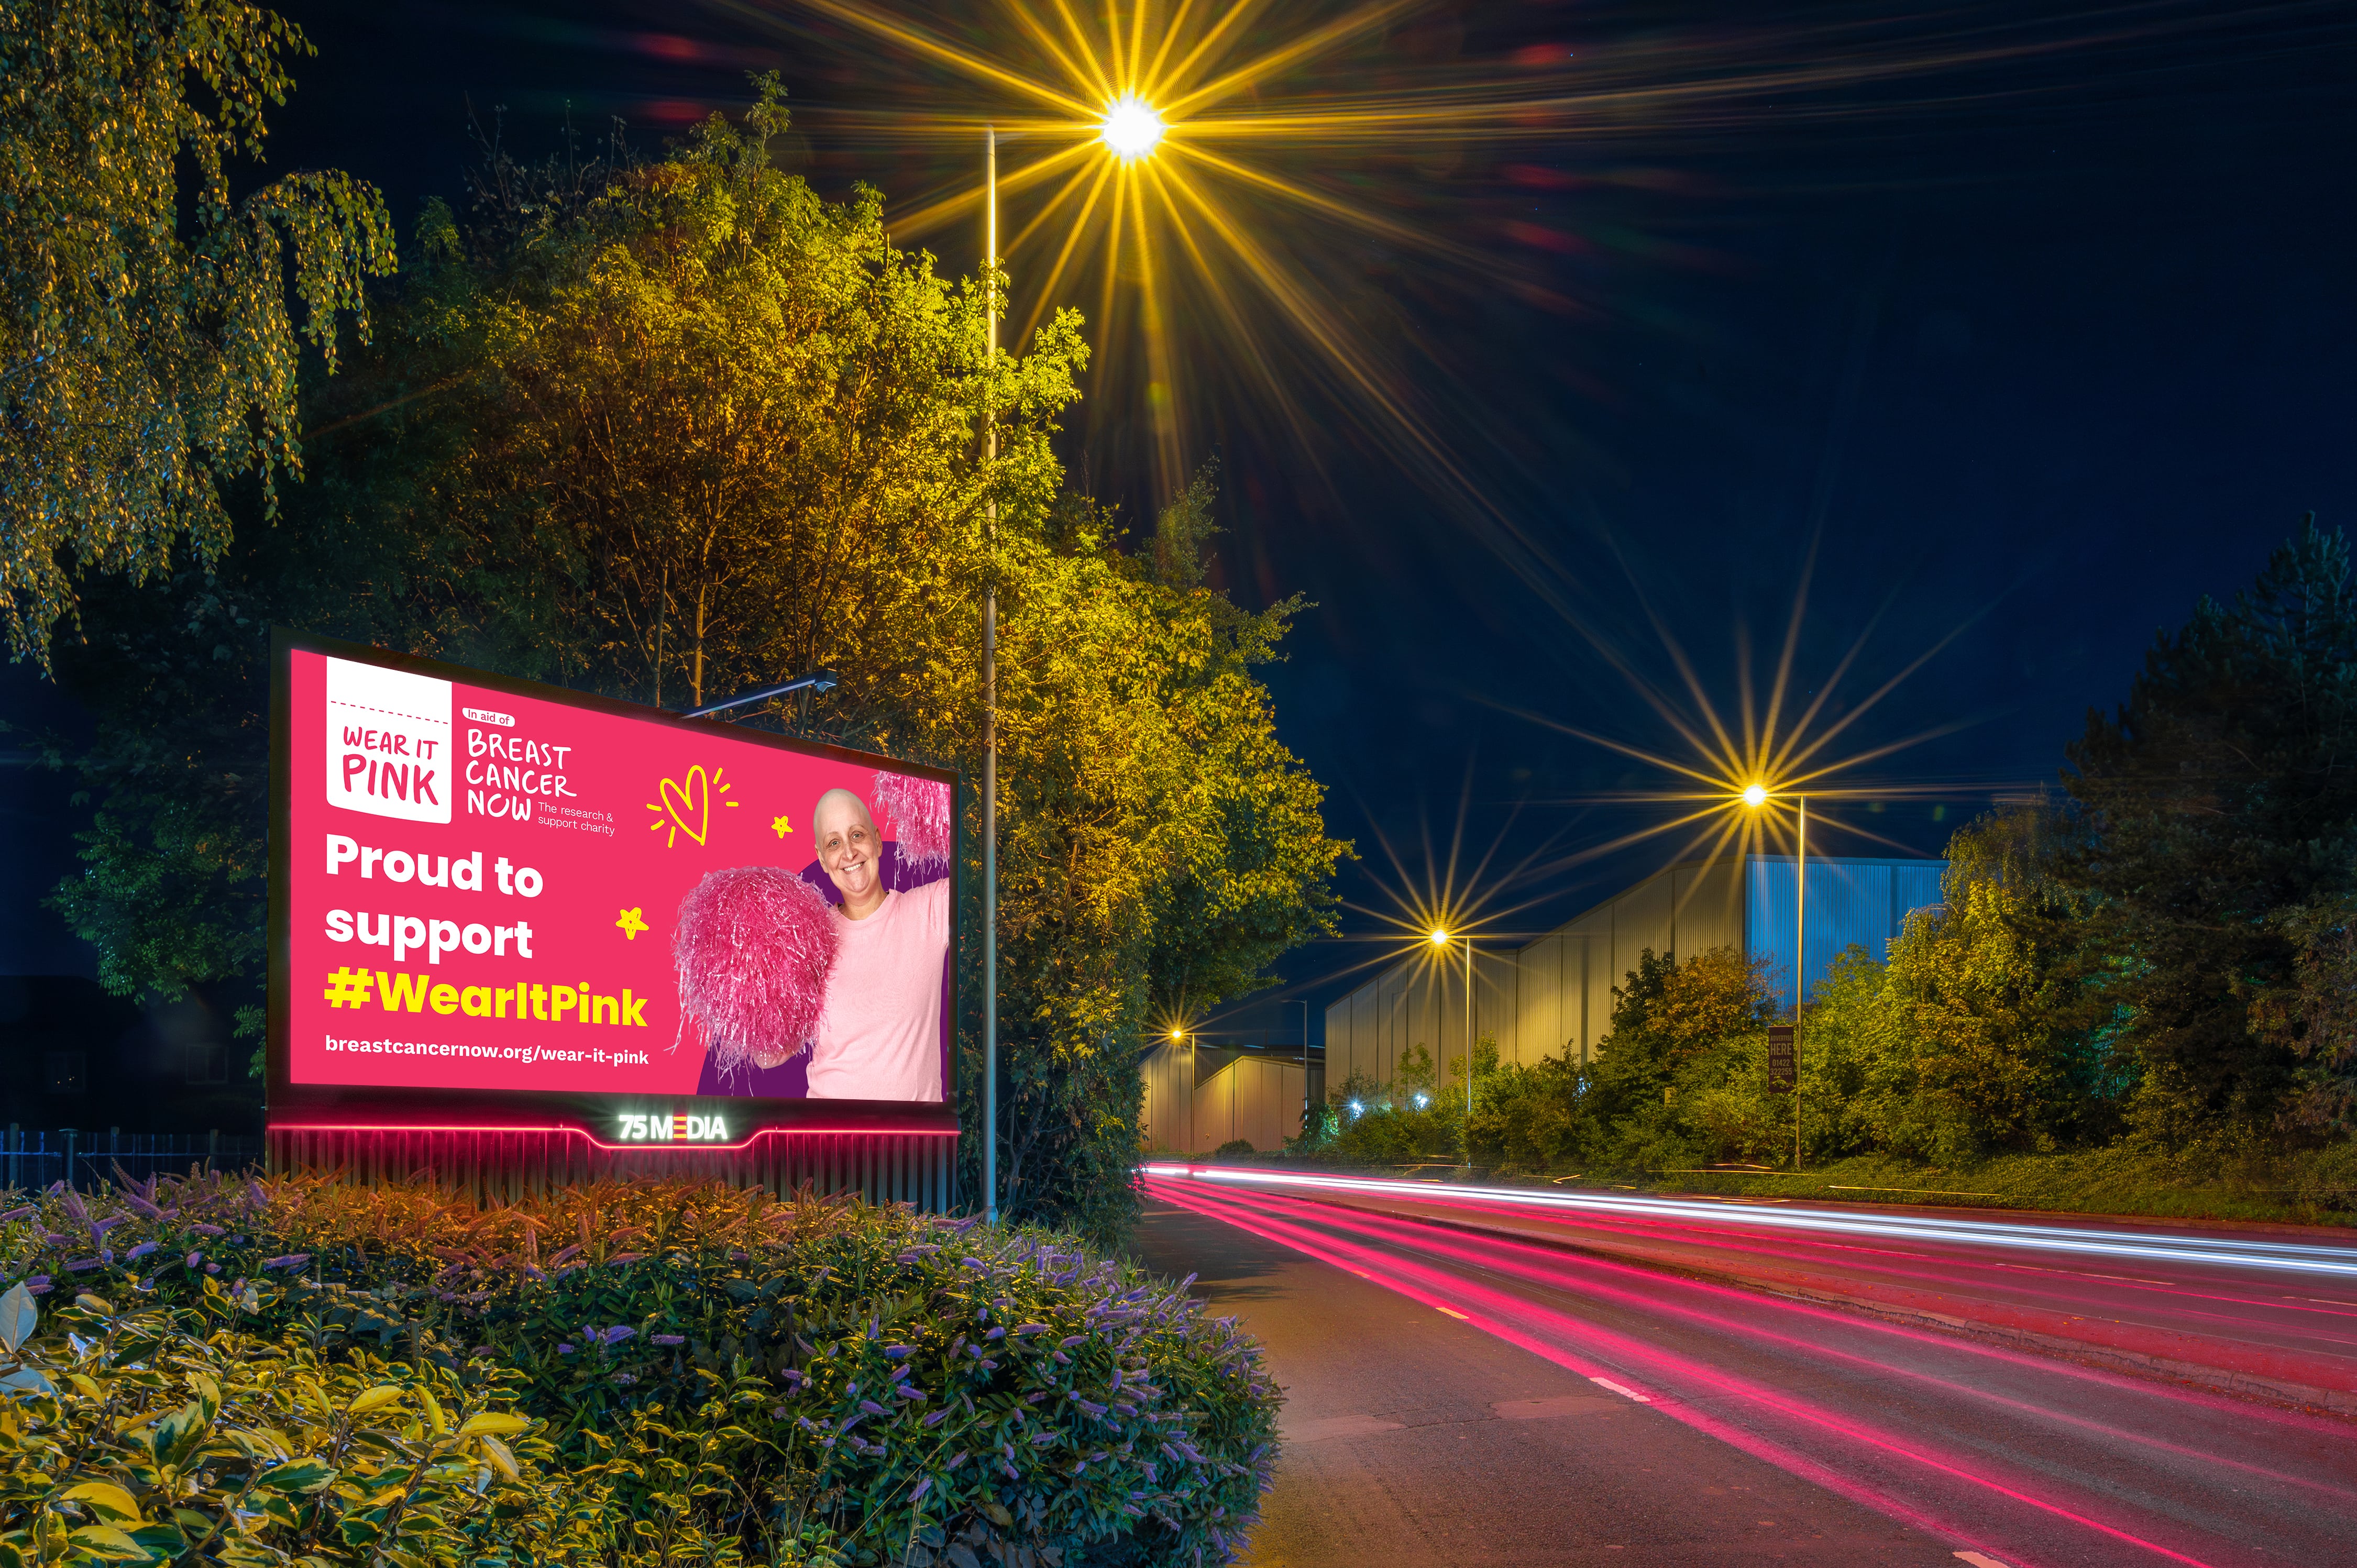 Billboards around the UK urge people to Wear it Pink for Breast Cancer Now